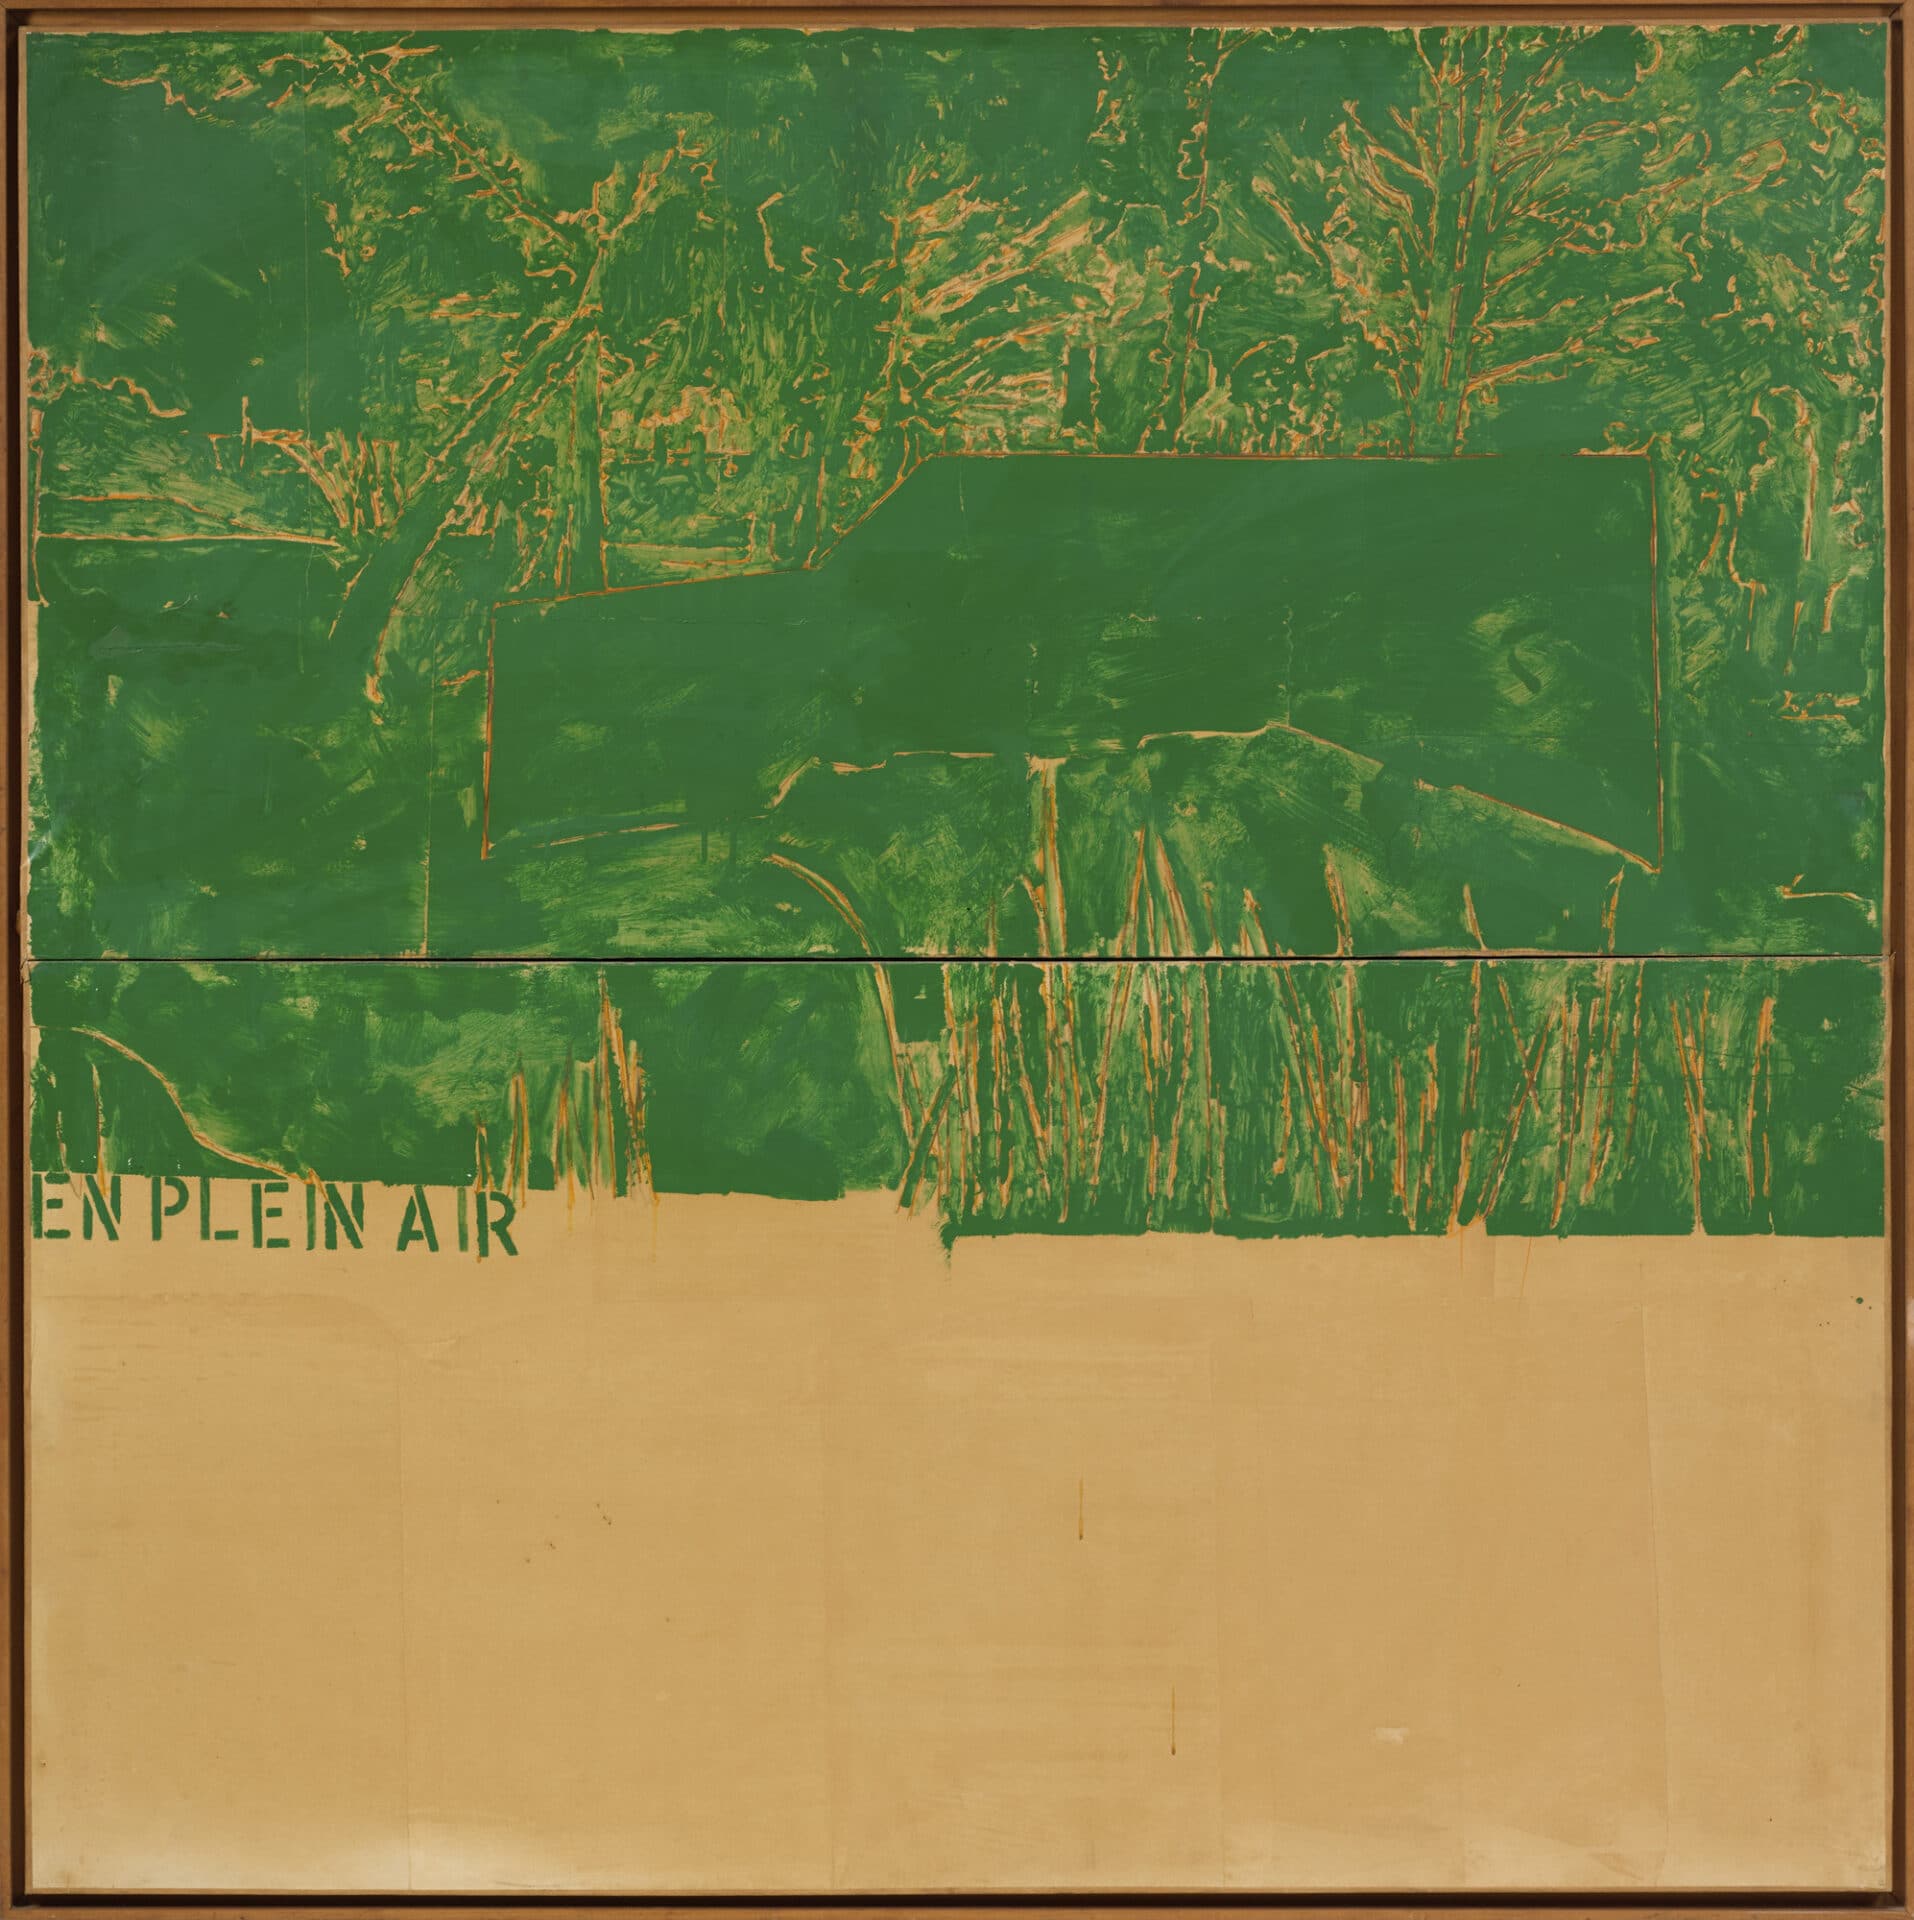 Schifano, Mario, 'En plein air', 1963, Enamel on paper laid down on two attached canvases 63 x 63 in (160 x 160 cm) Private Collection, Monaco. © 2020 Artists Rights Society (ARS), New York / SIAE, Rome © Archivio Mario Schifano. 